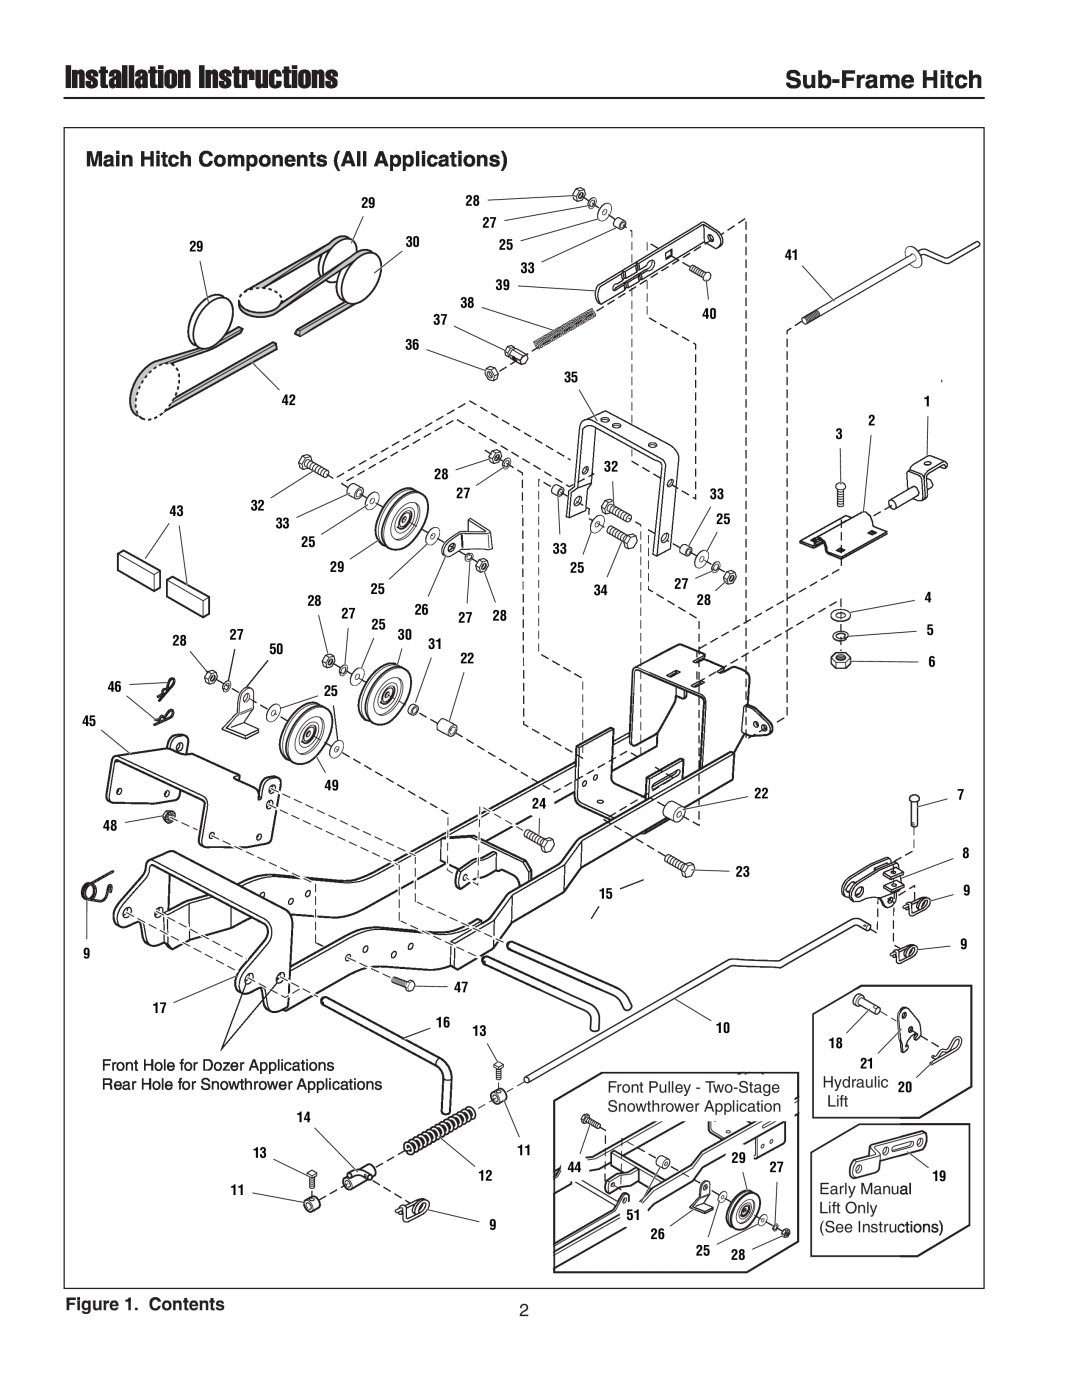 Briggs & Stratton 1695195 Installation Instructions, Sub-Frame Hitch, Front Hole for Dozer Applications, Hydraulic, Lift 